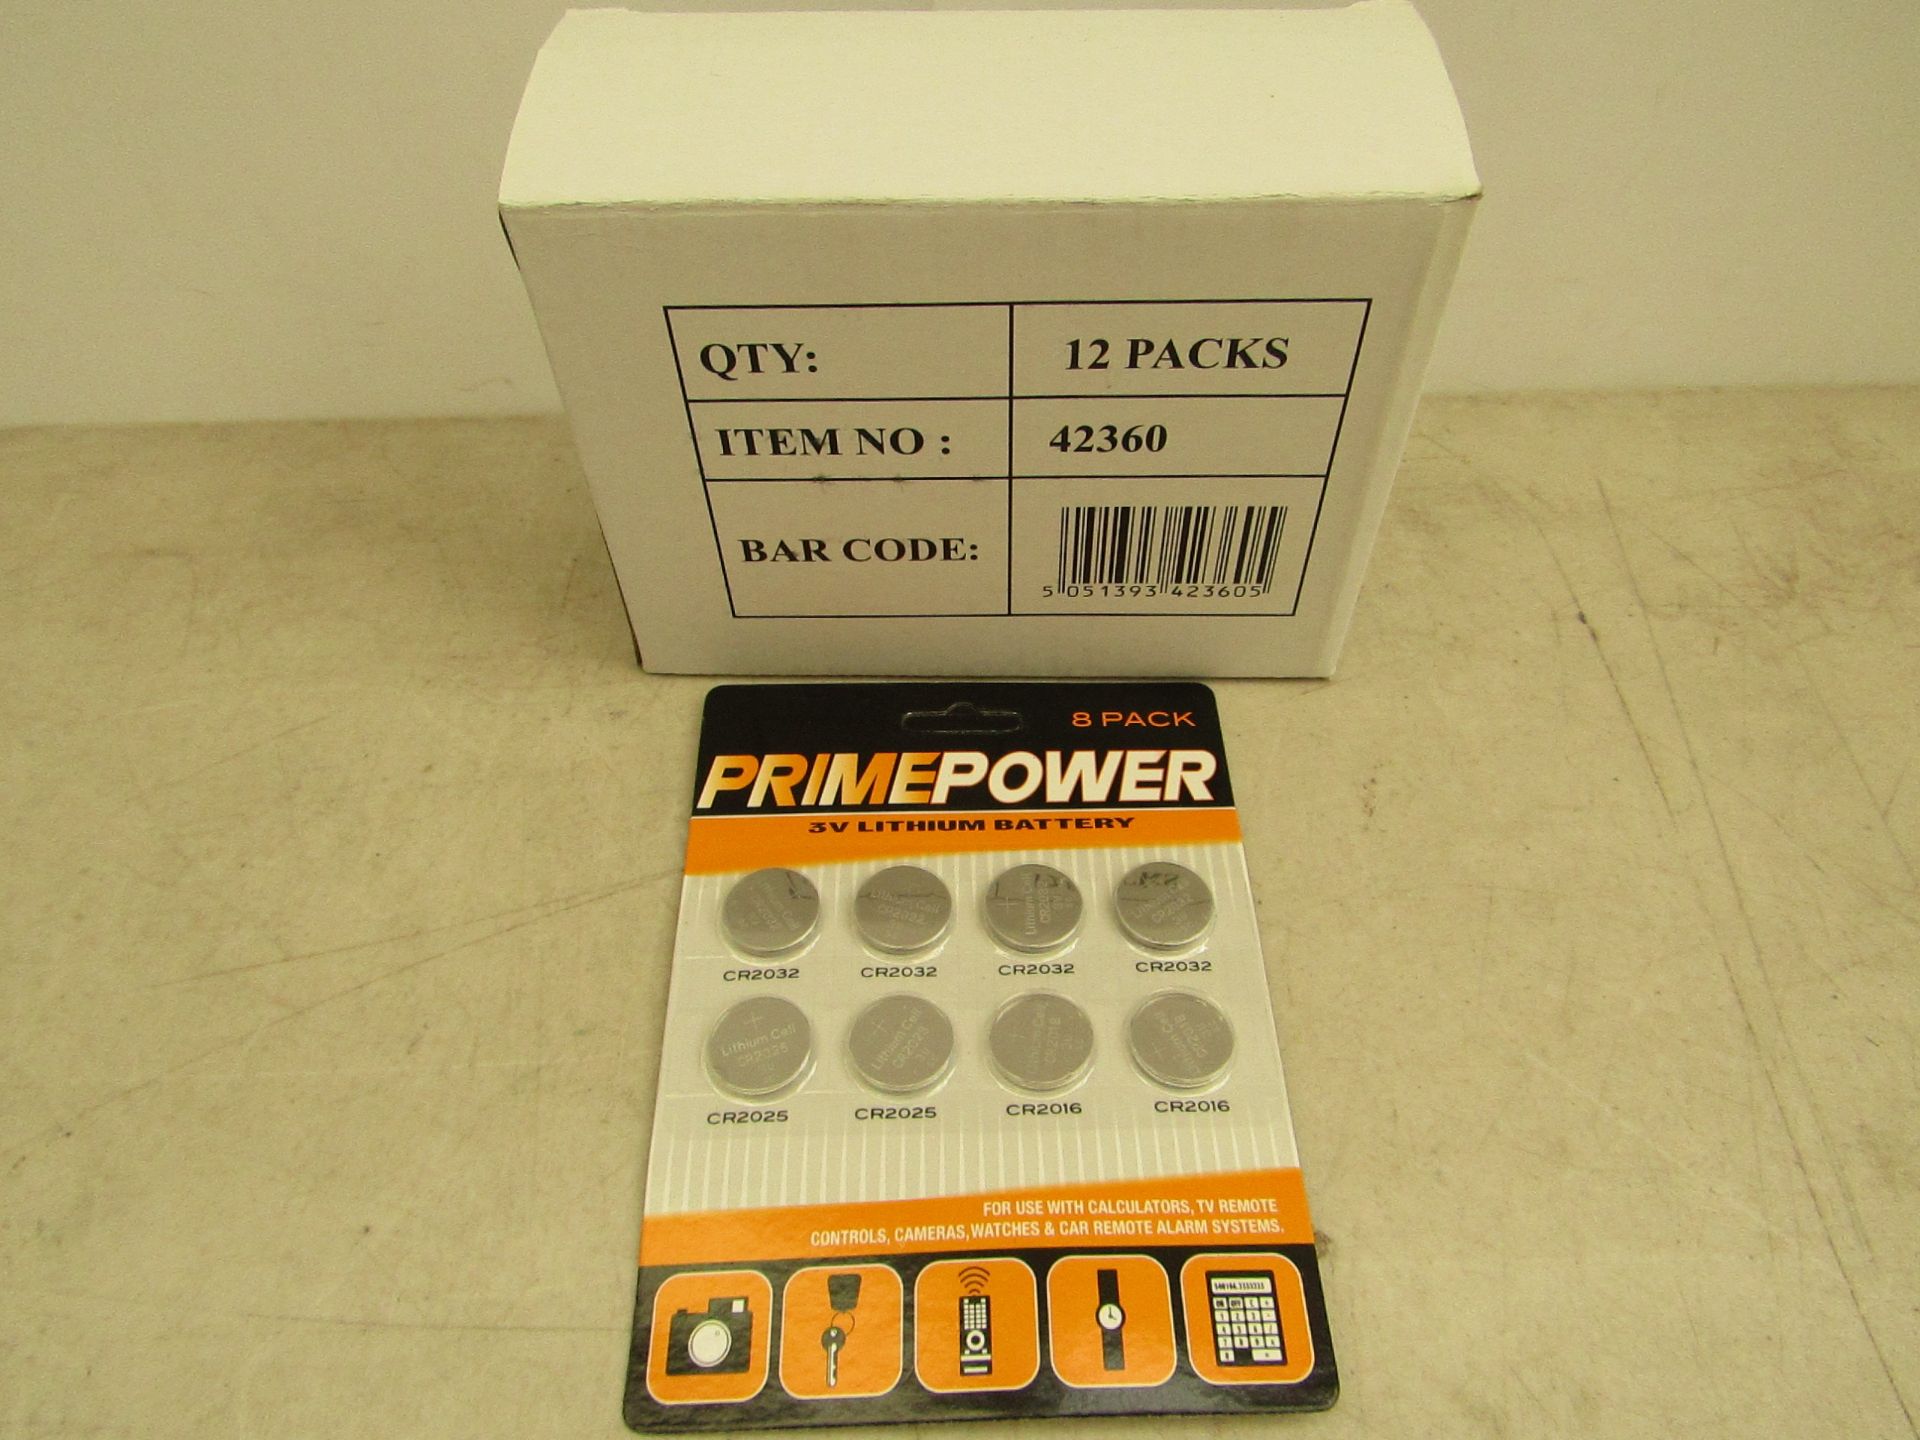 2x Boxes each containing 12x packs of 8 Prime Power 3V Lithium Batteries (4x CR2032, 2x CR2025 &